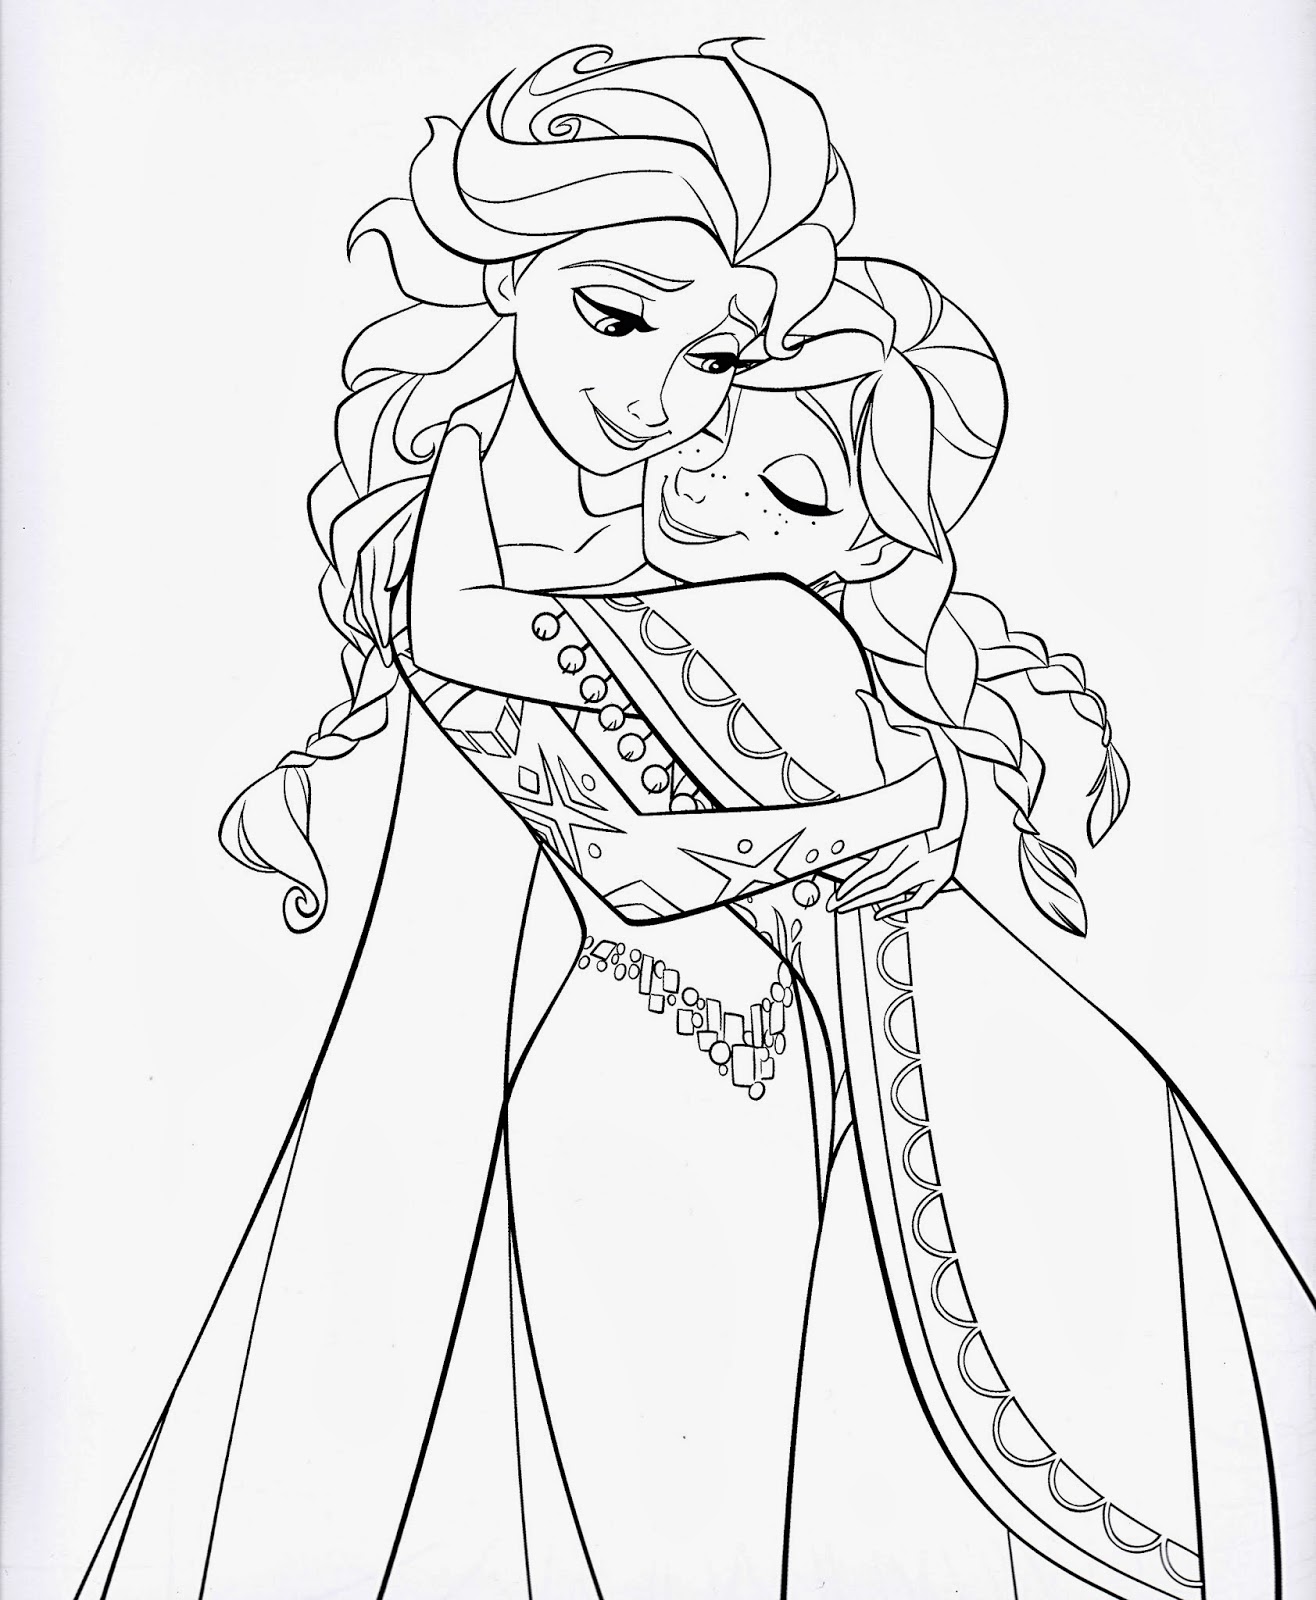 Coloring Pages Frozen Coloring Pages Free And Printable Coloring Wallpapers Download Free Images Wallpaper [coloring436.blogspot.com]